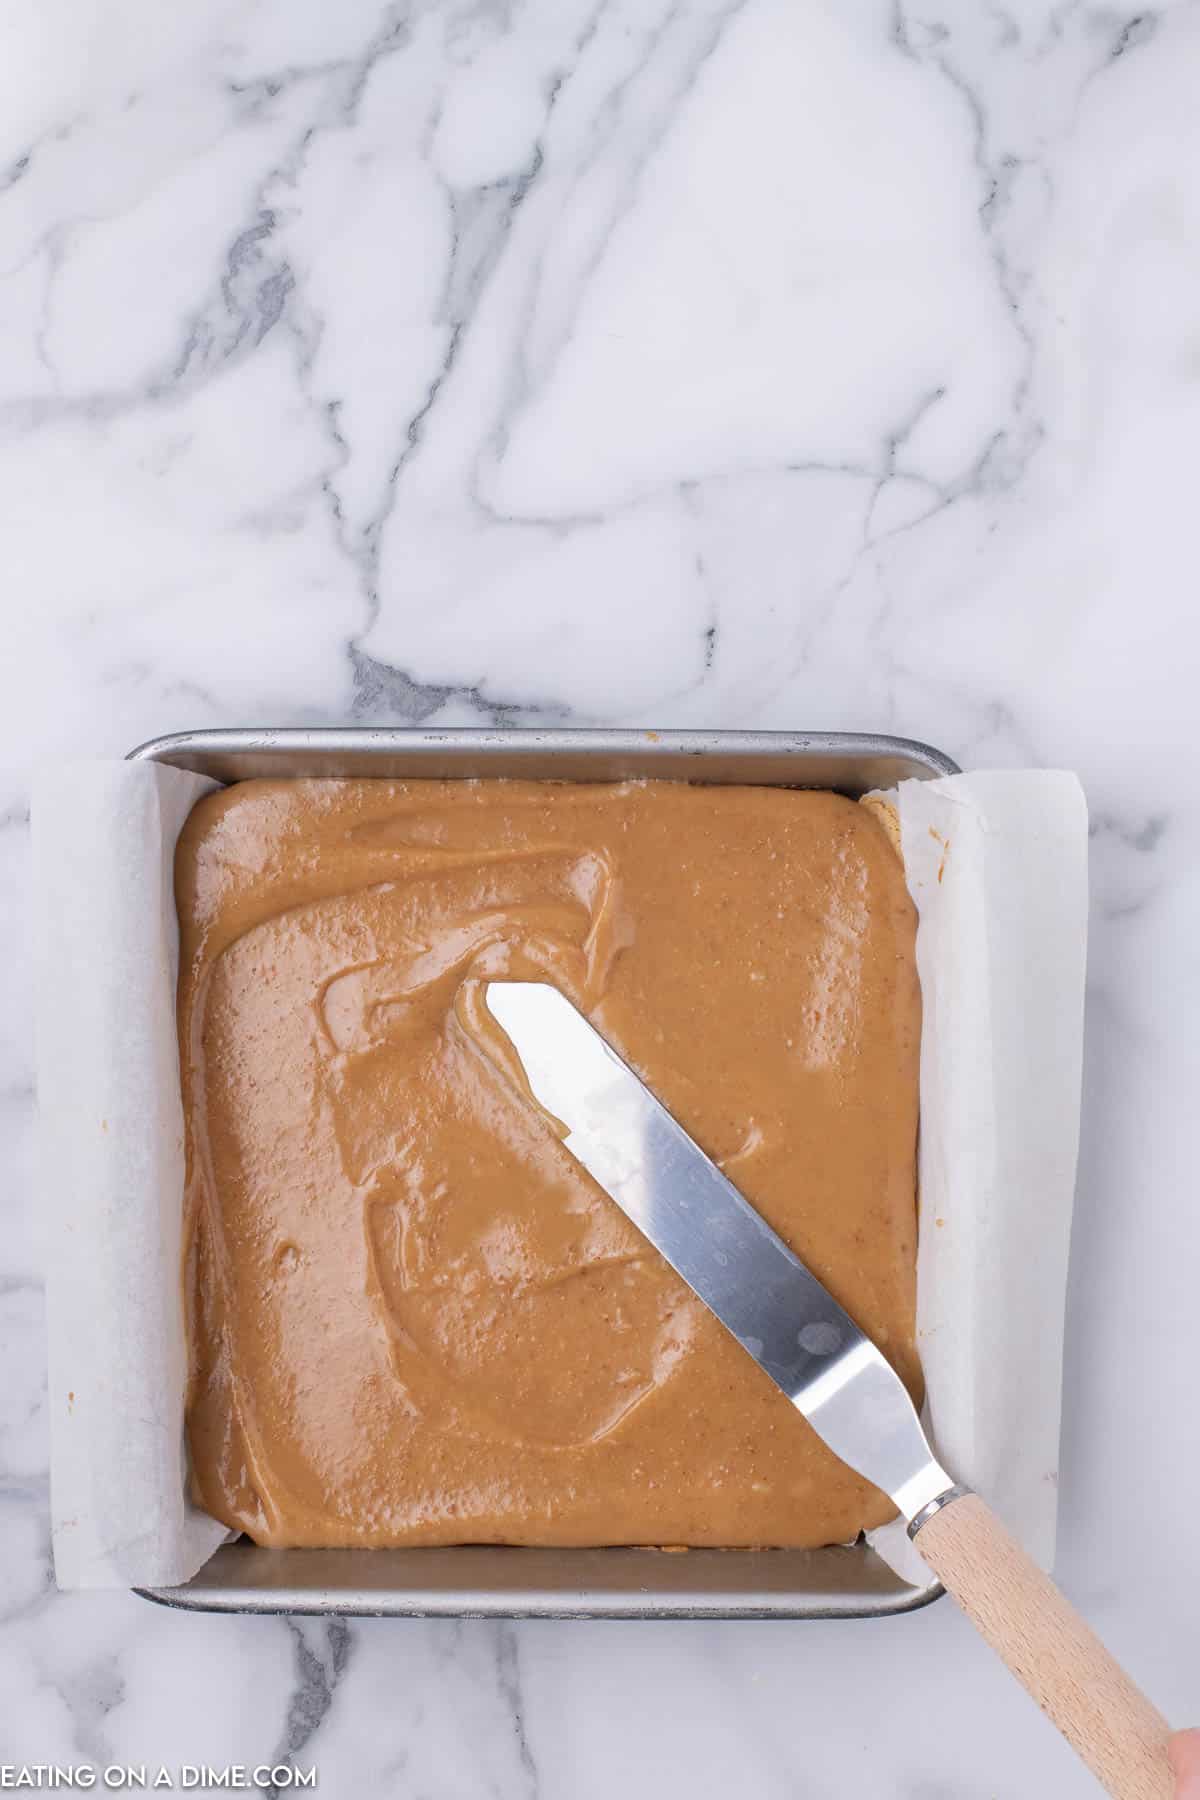 Caramel sauce spread in the baking dish with a knife